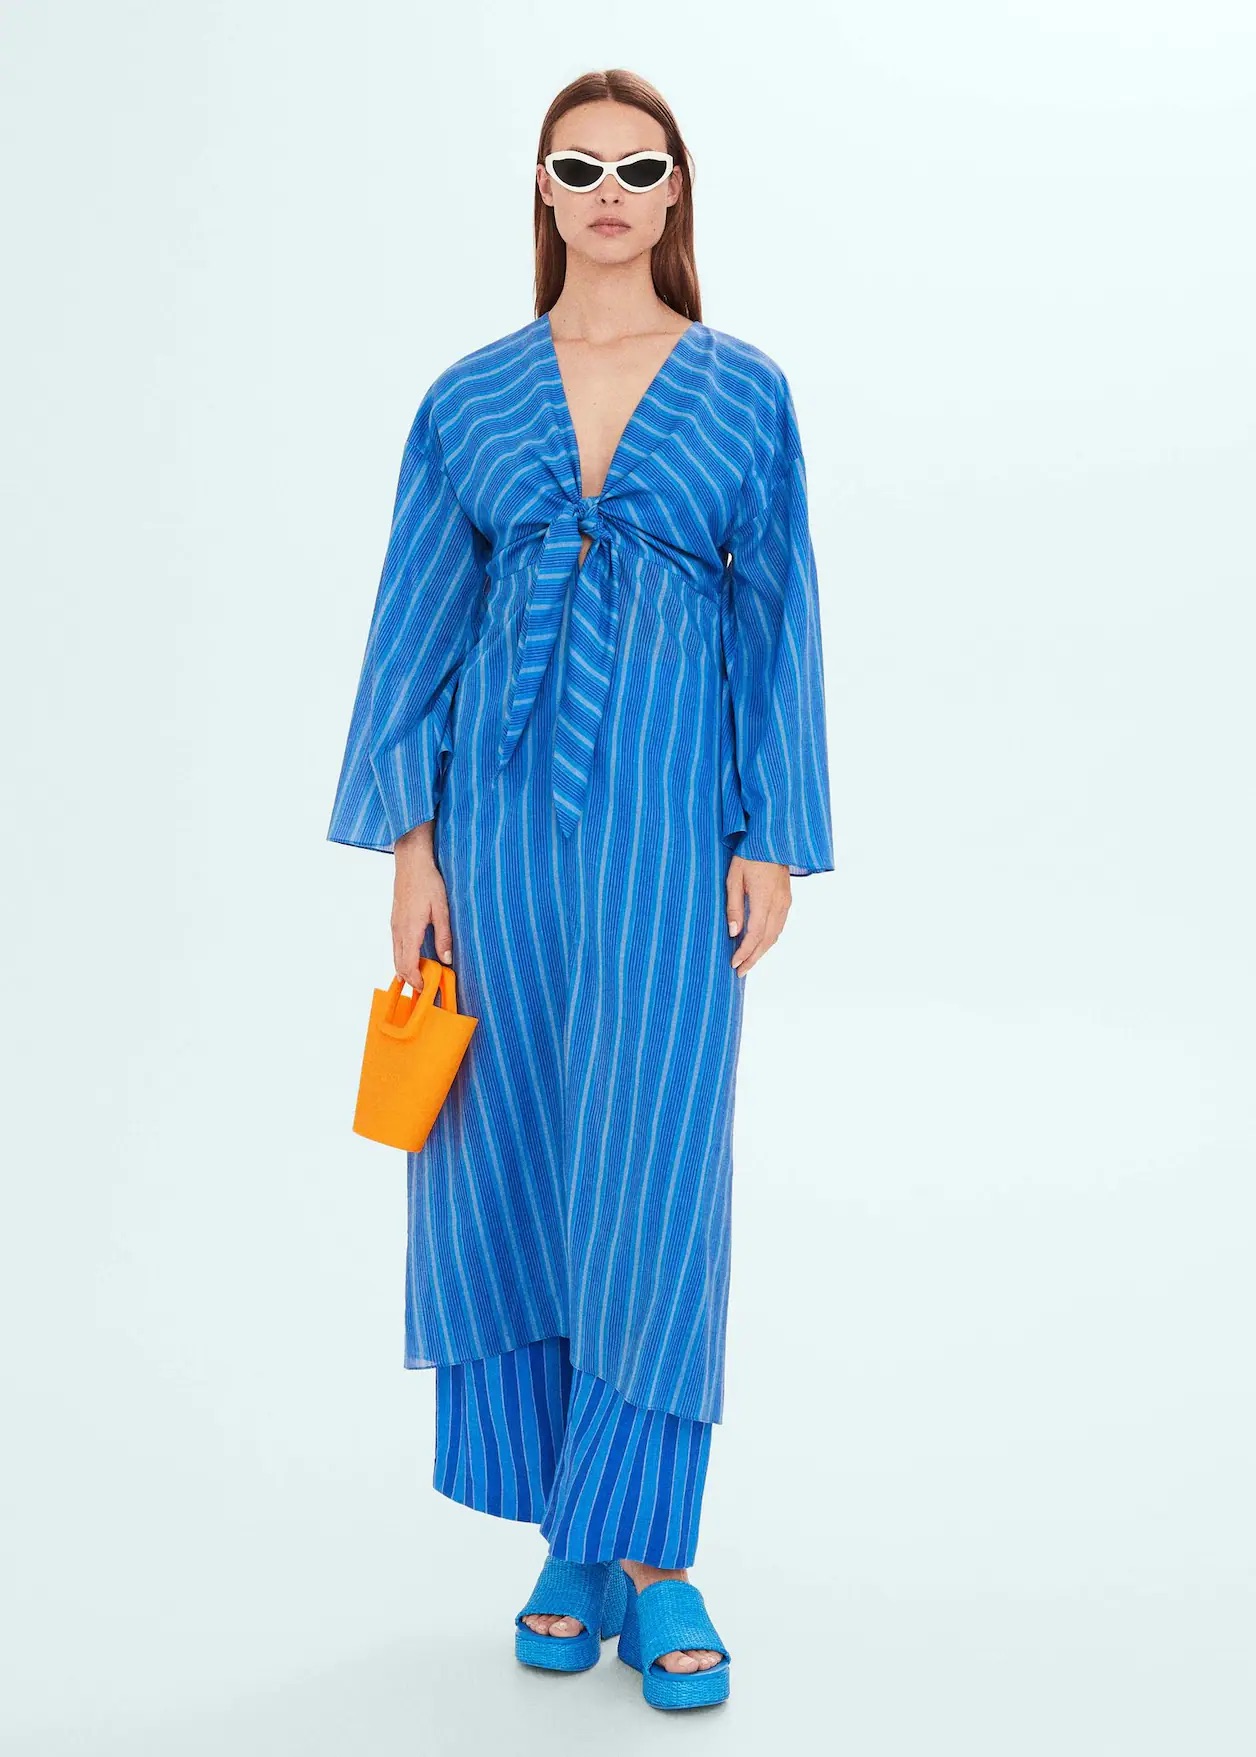 The Simon Miller x Mango Collab Is Here 33 Pieces We Adore Who What